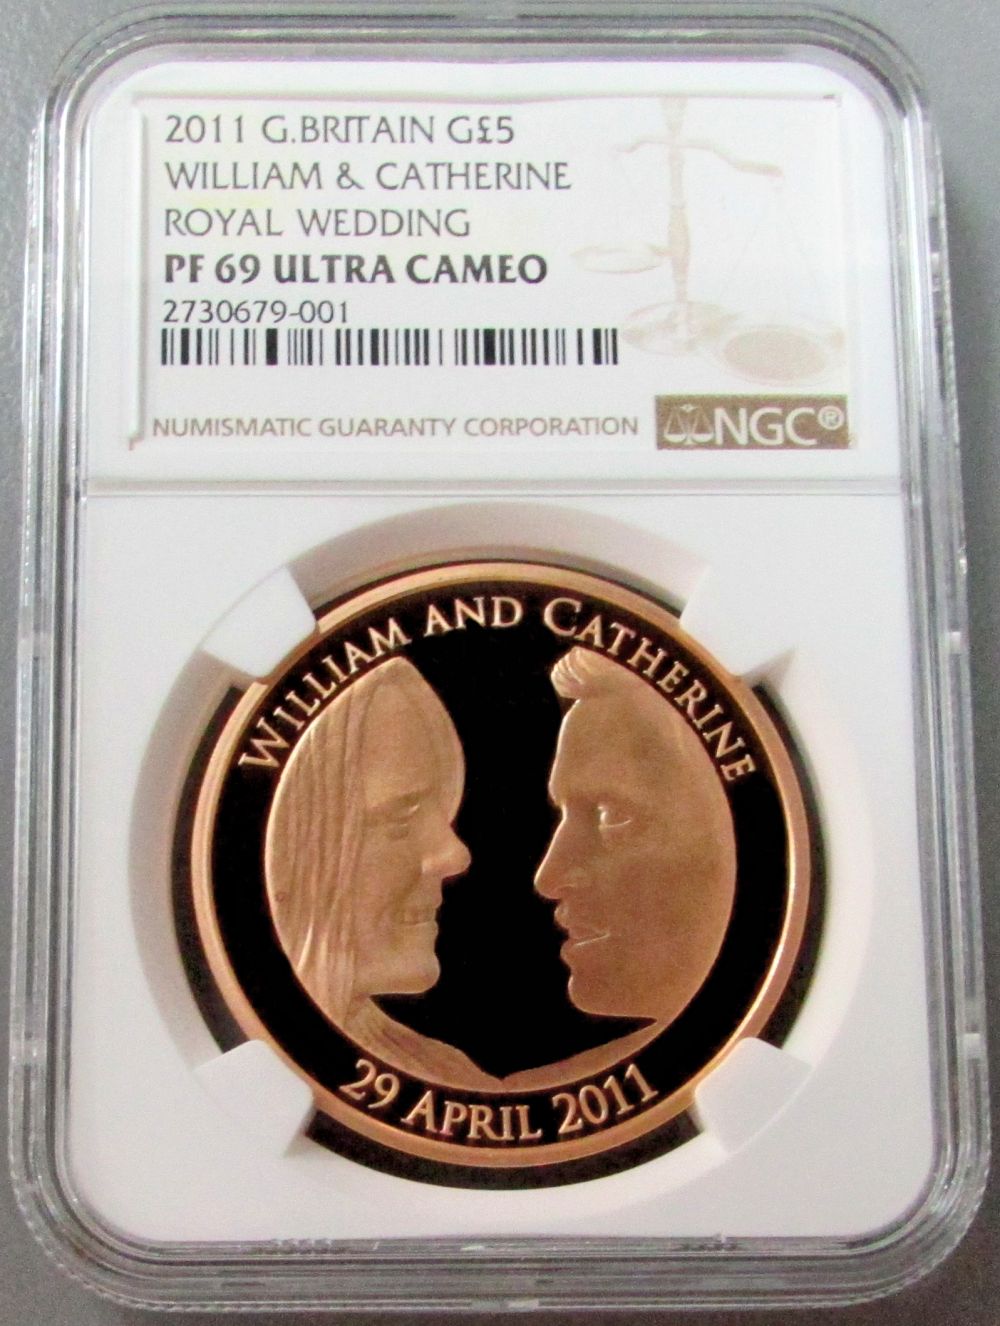 2011 GOLD GREAT BRITAIN 5 POUND ROYAL WEDDING WILLIAM & CATHERINE NGC PROOF 69 ULTRA CAMEO 